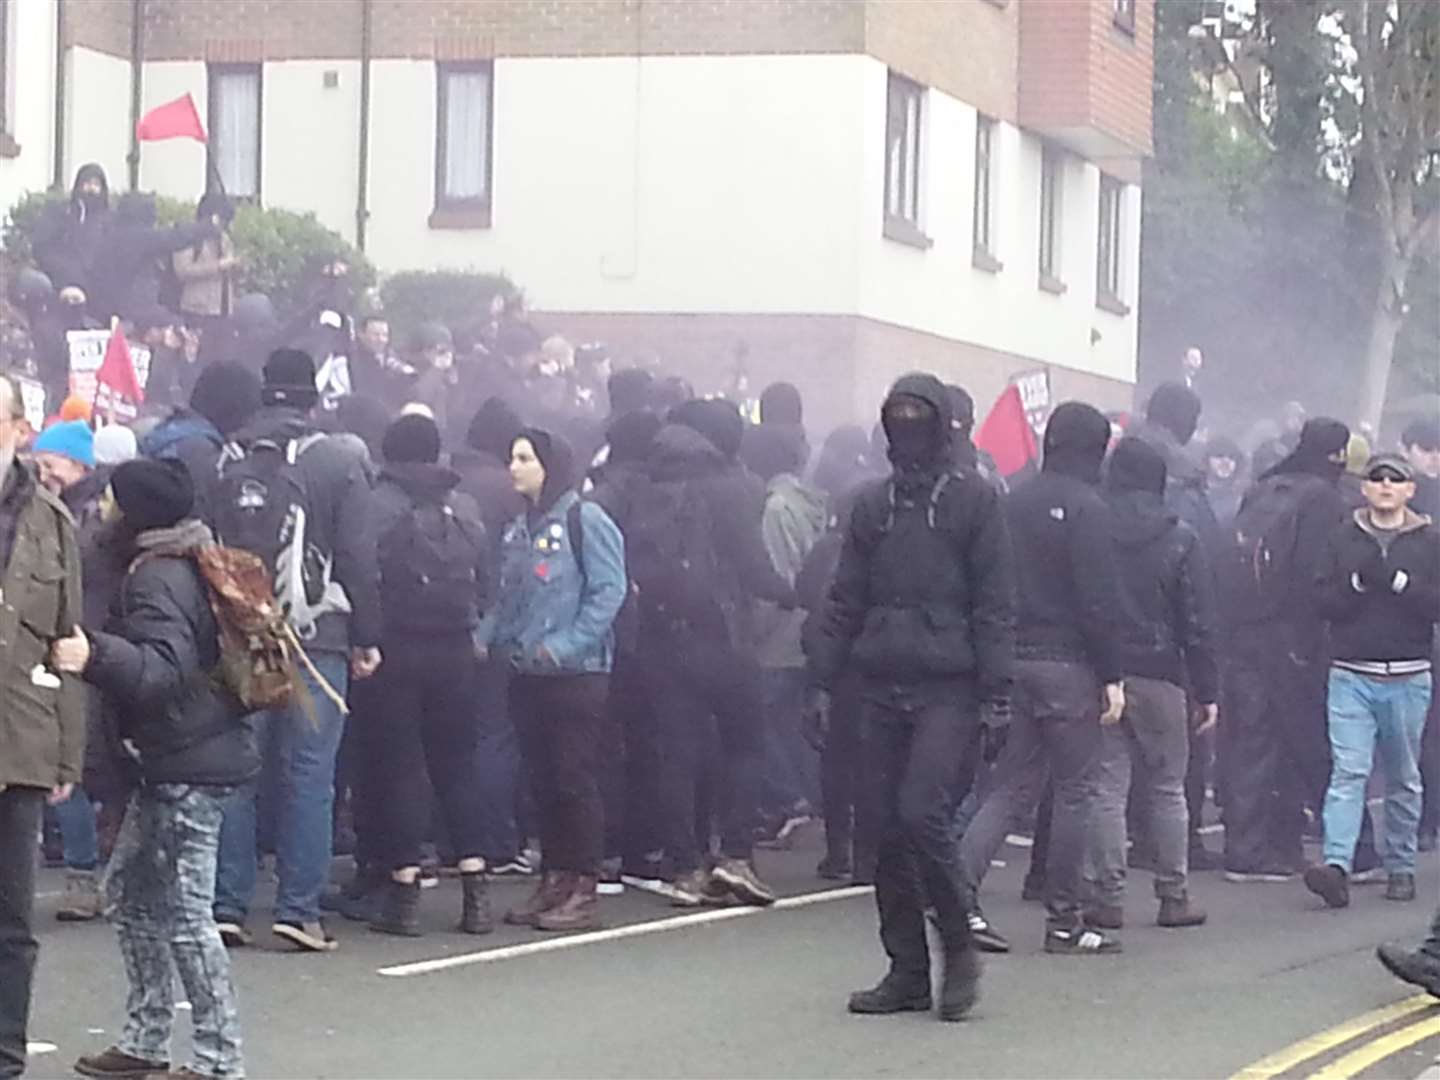 Protesters at Folkestone Road as tensions mounted.